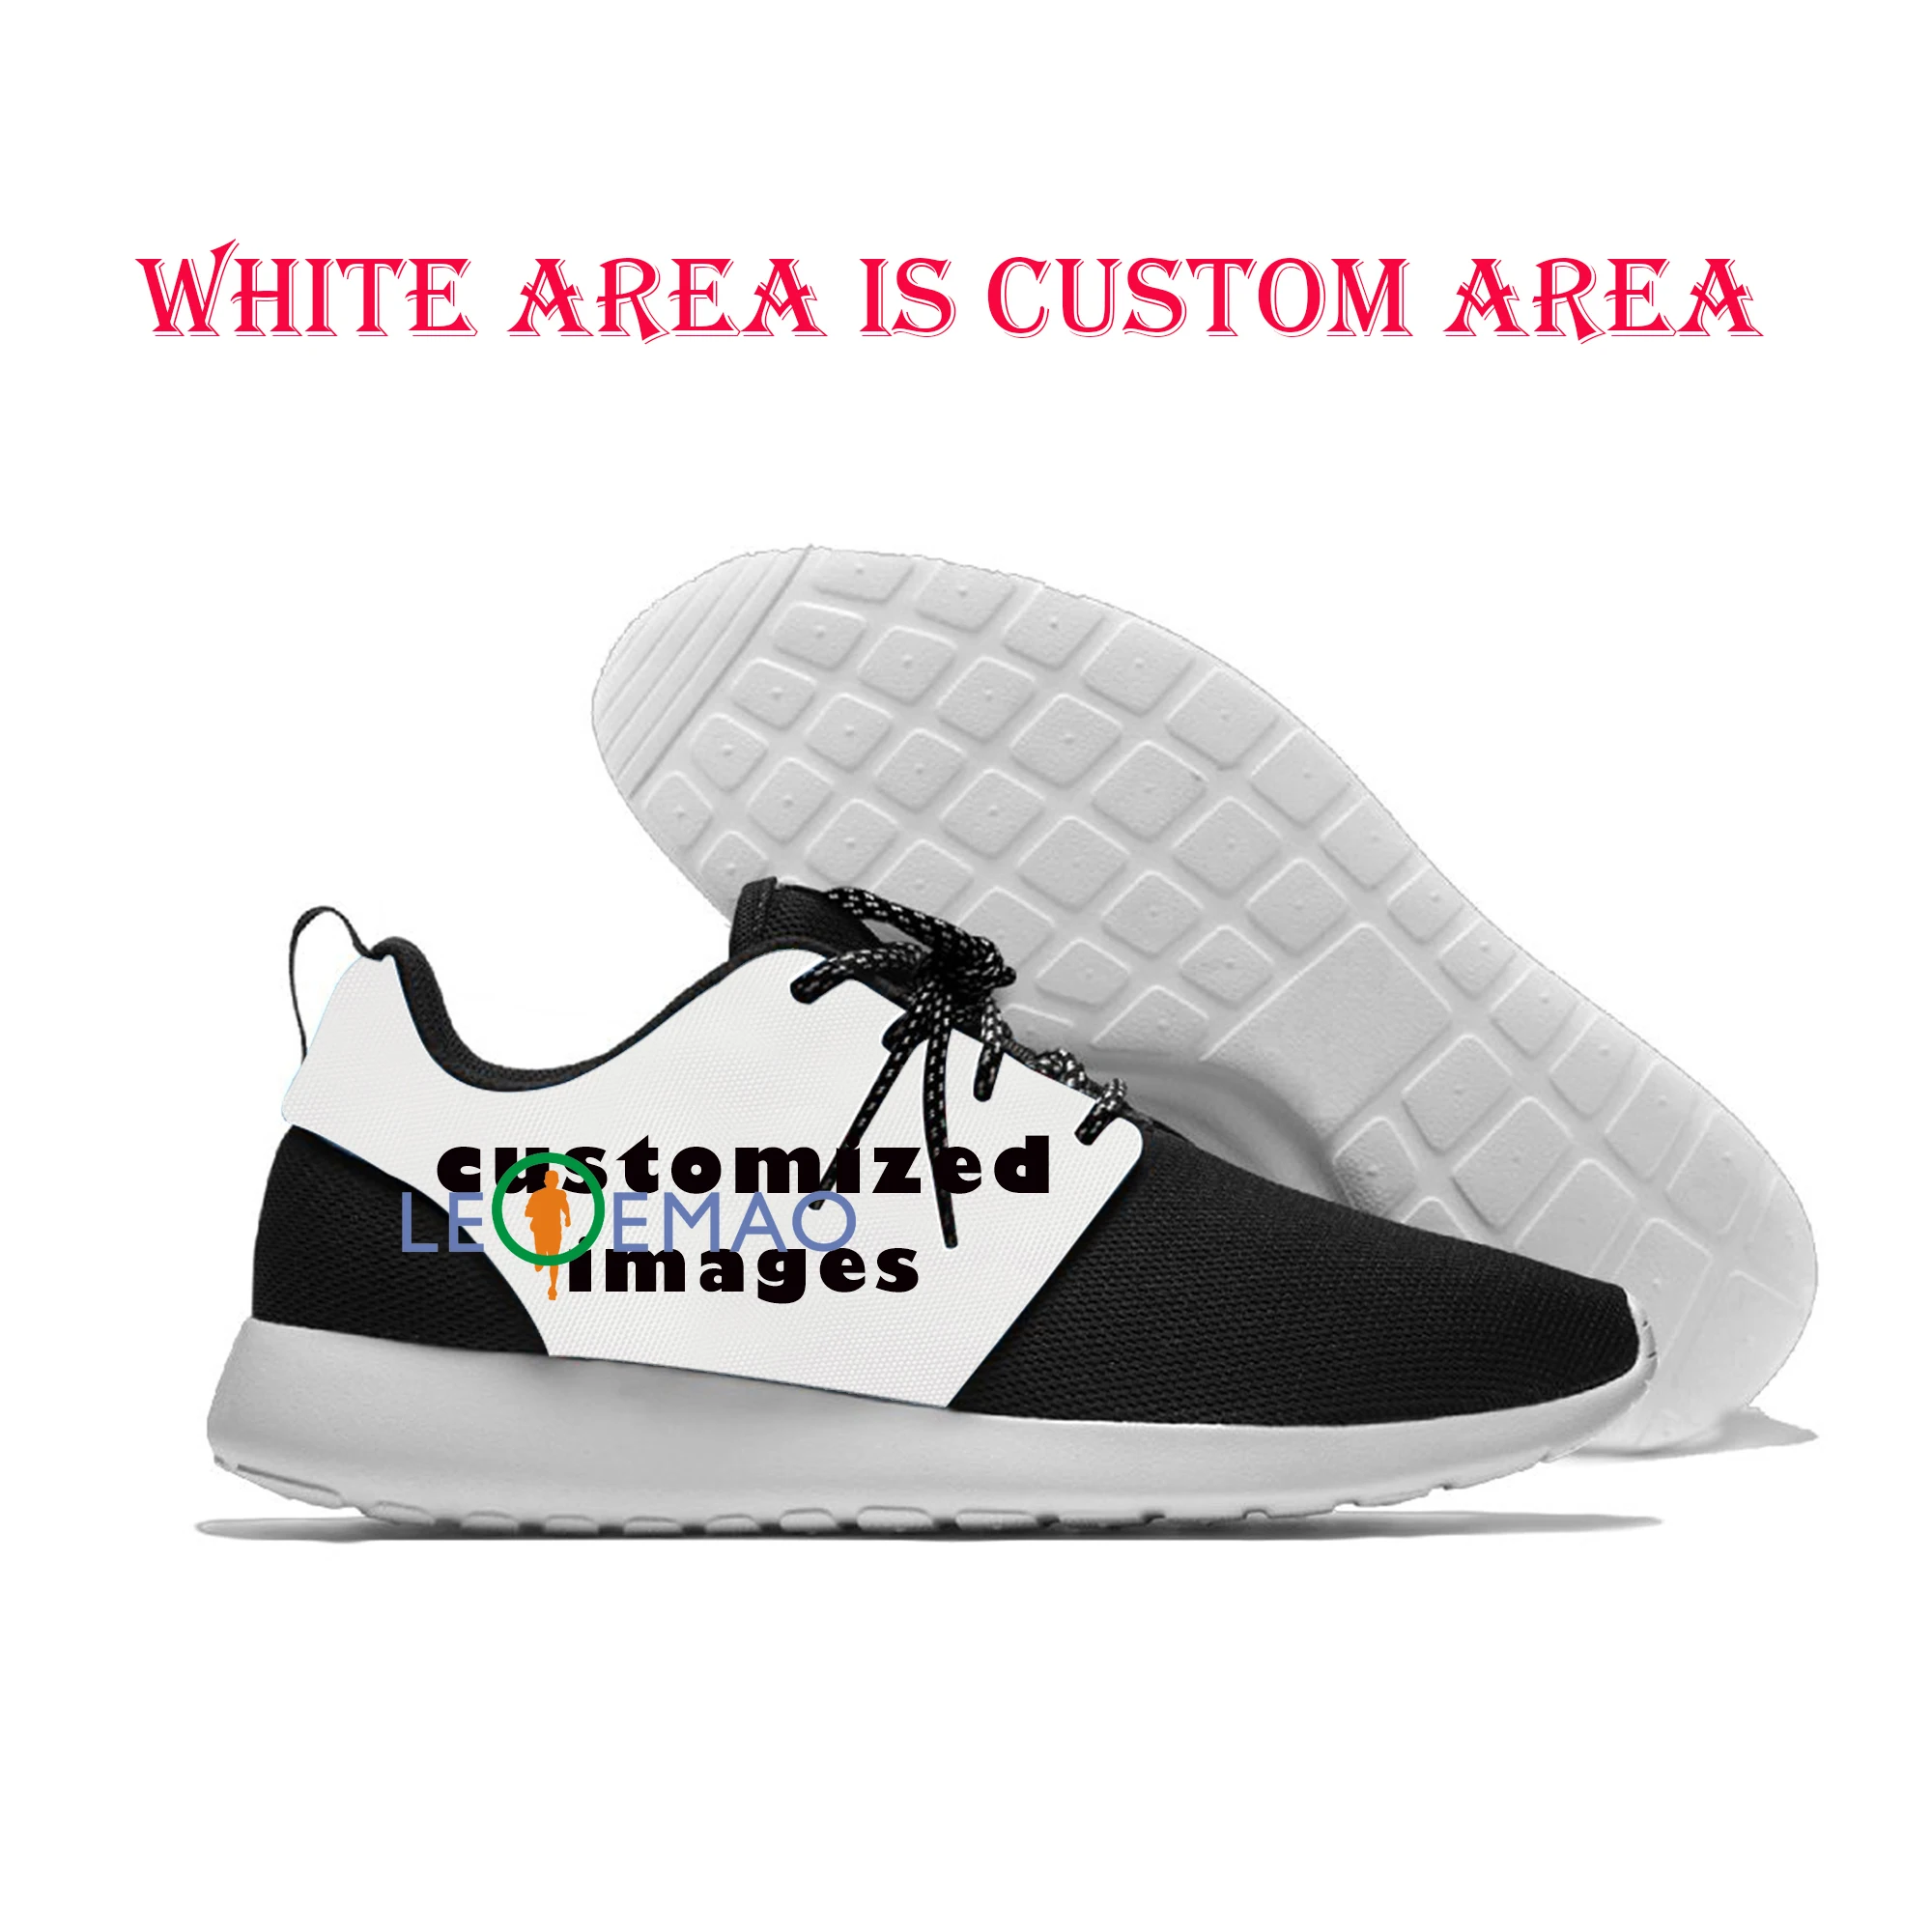 

Free Running Fantasy Animal Unicorn Western Myth and Legends Vogue Shoes Bright Blues Jogging Athietic Breathable Sneakers